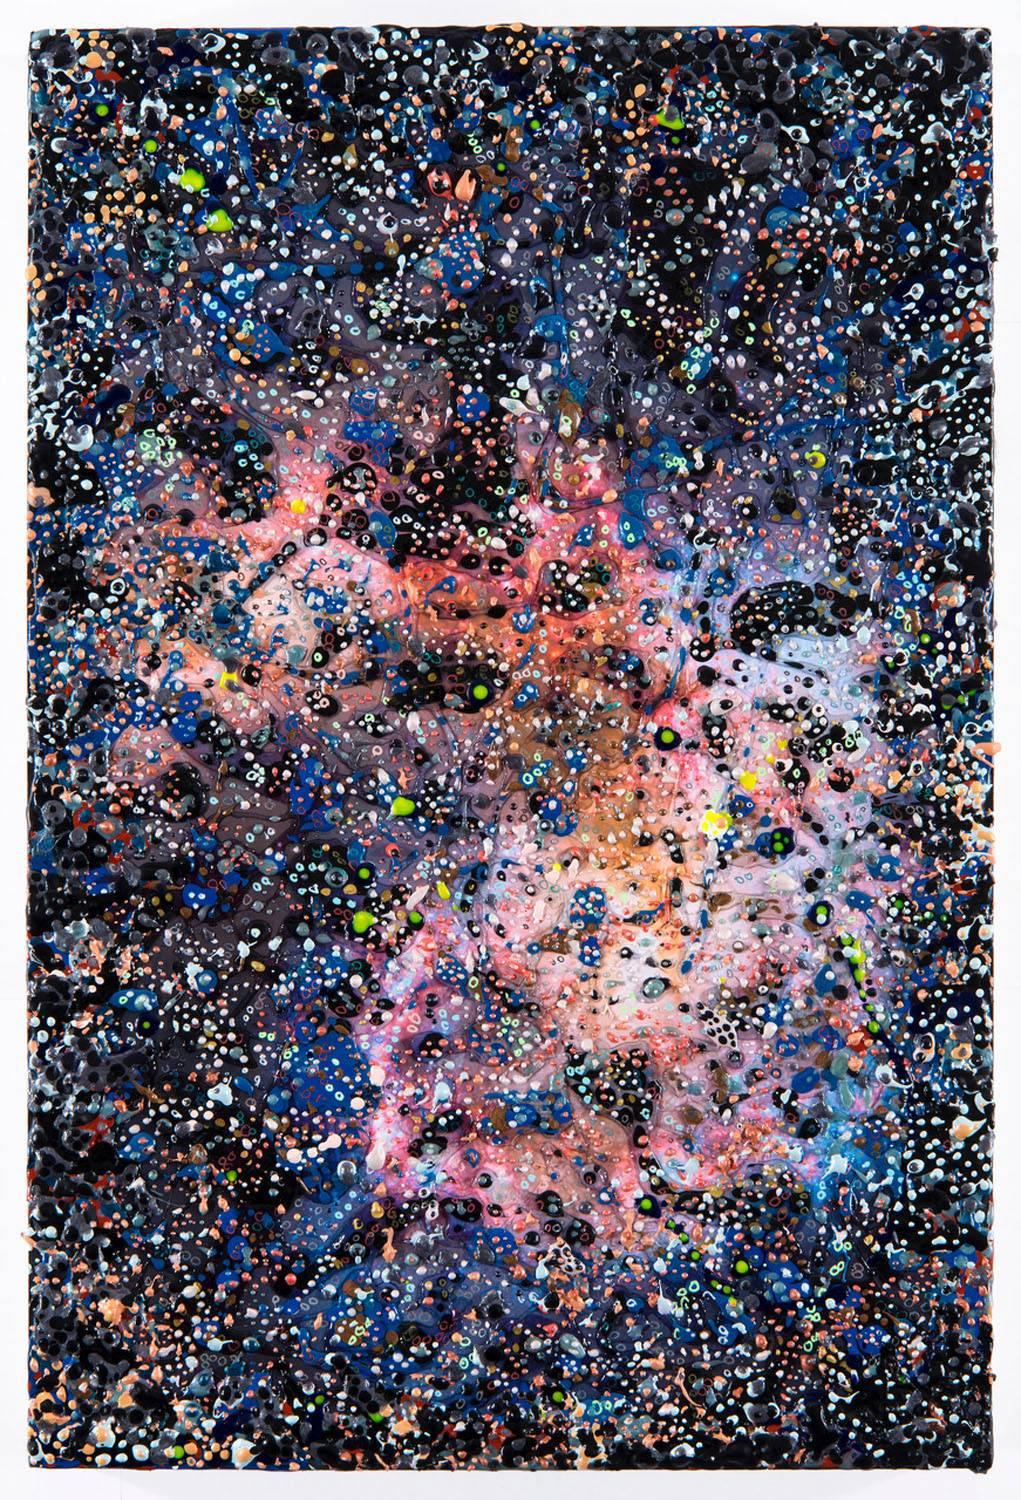 Elizabeth Knowles Abstract Painting - “Space” pinks, blues and black, a cosmic explosion, inspired by Hubble